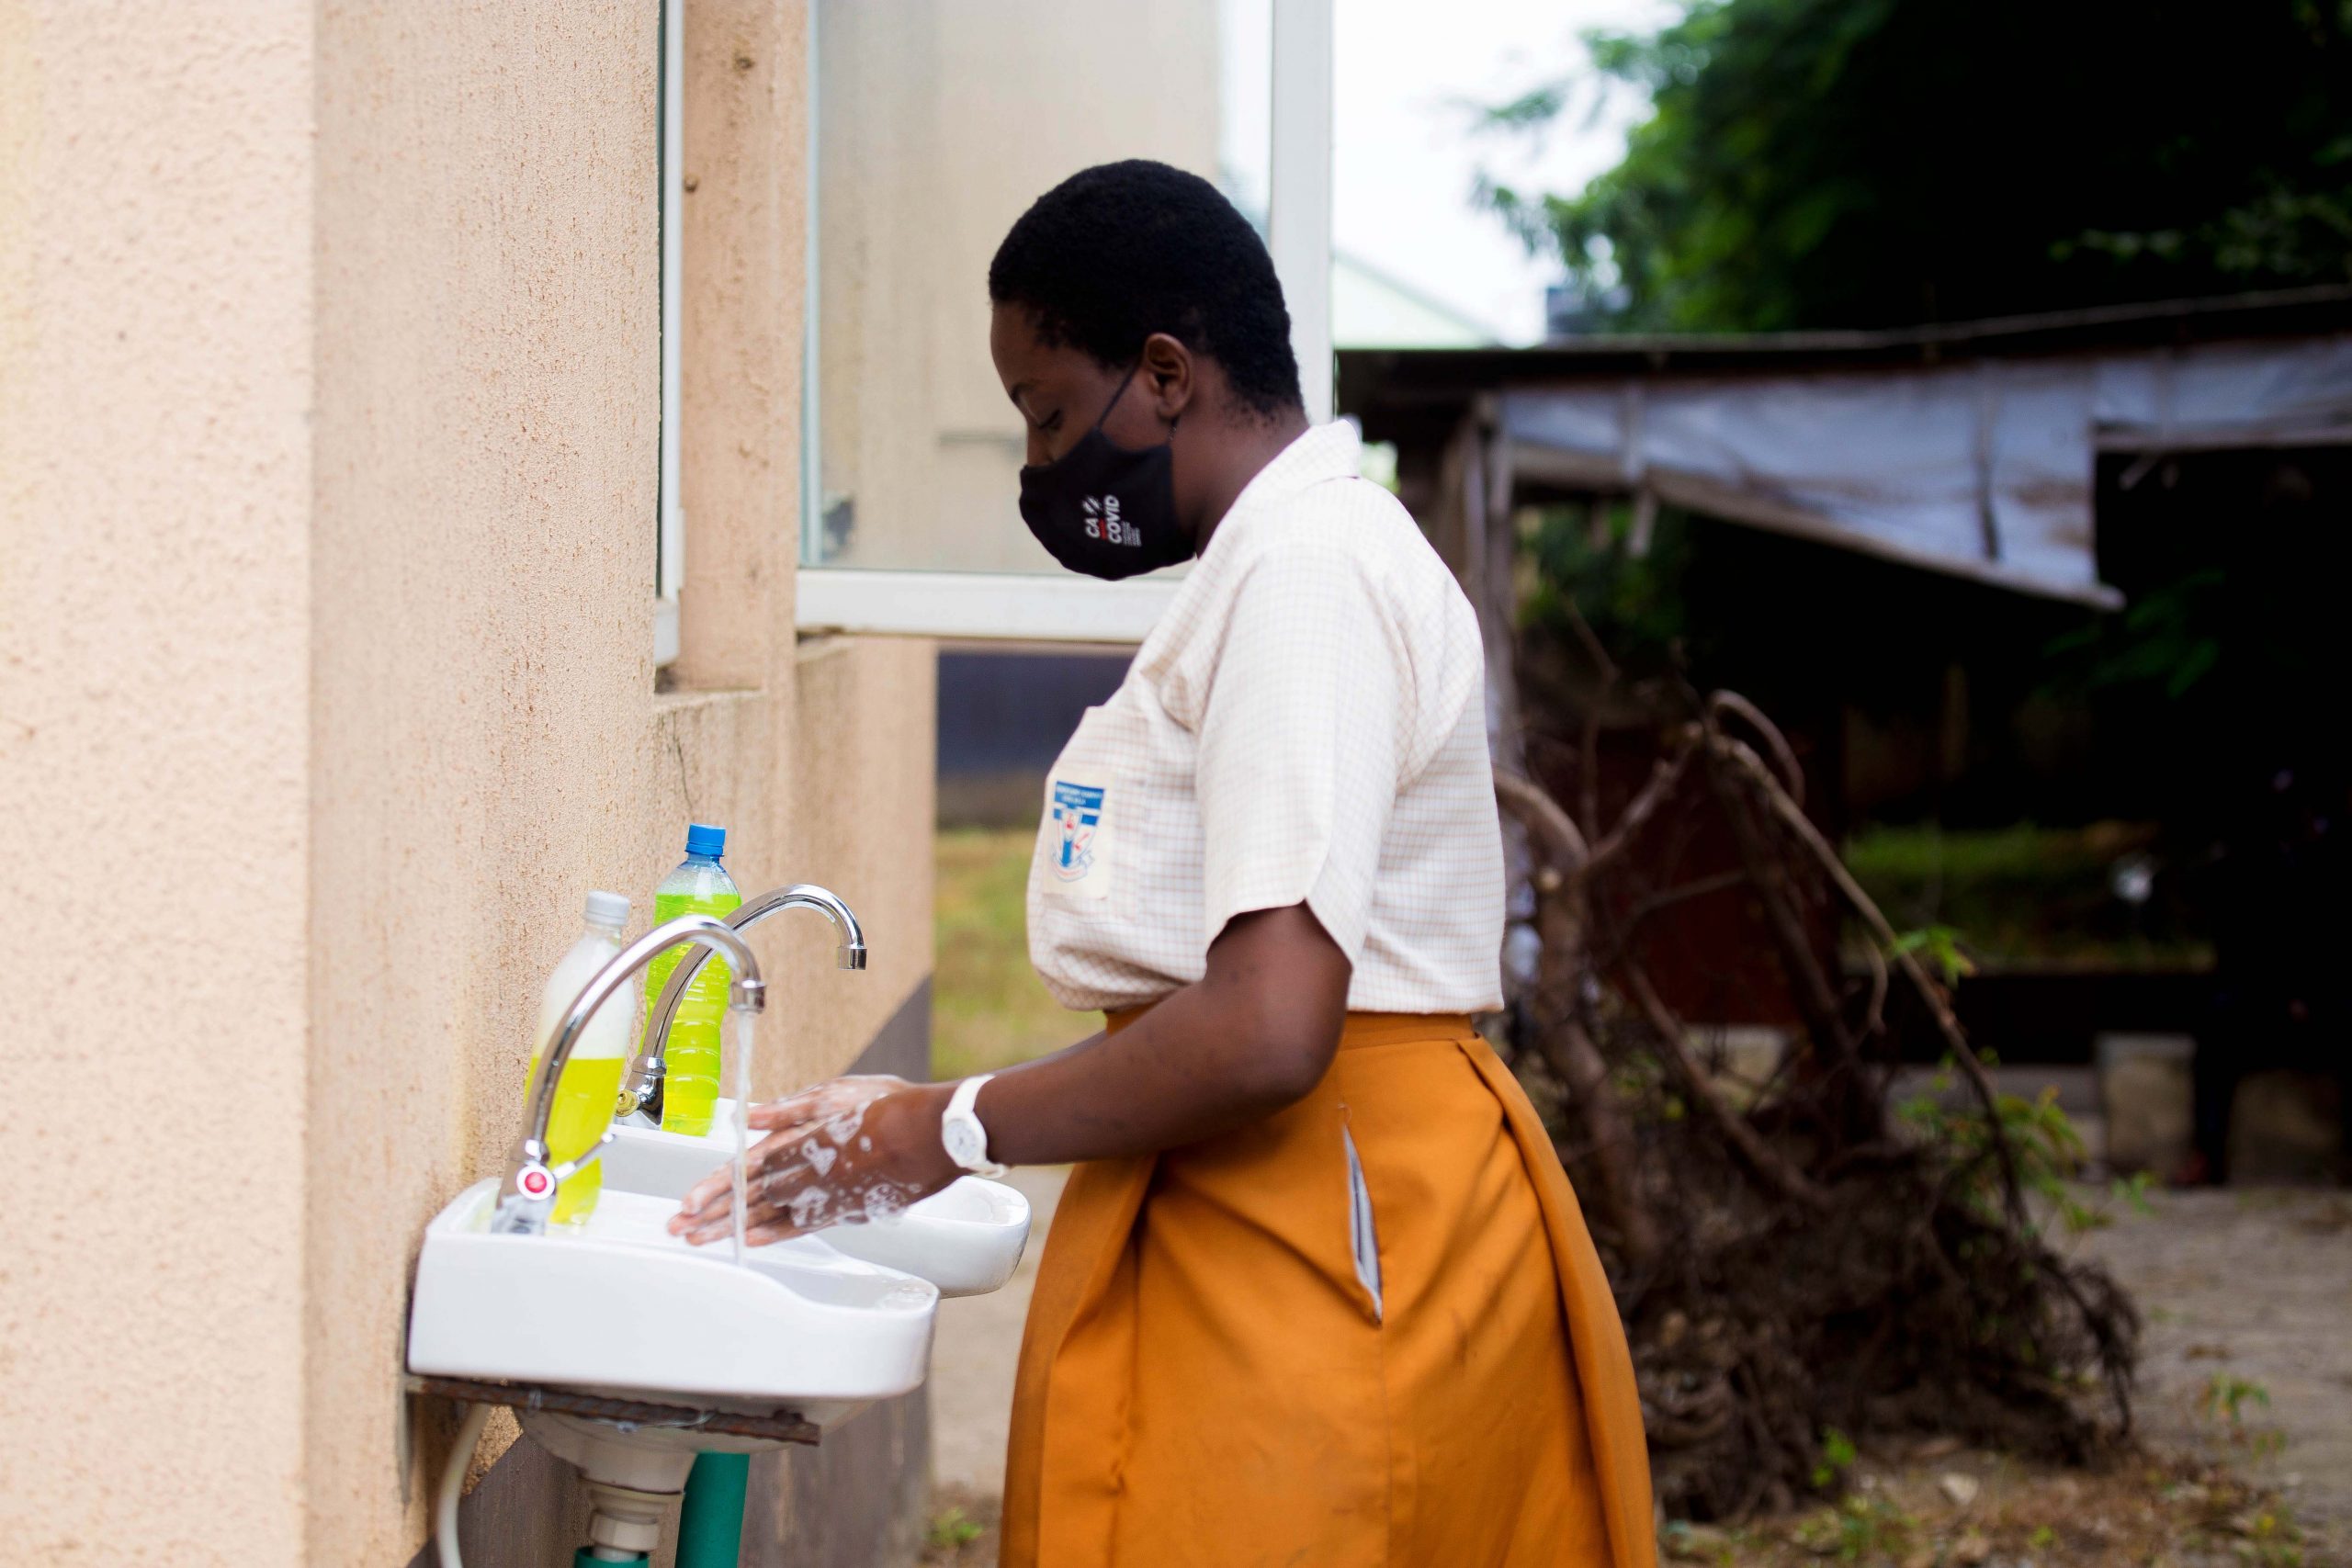 A student washing her hands at a school in Agindingbi area of Lagos State, Nigeria, today